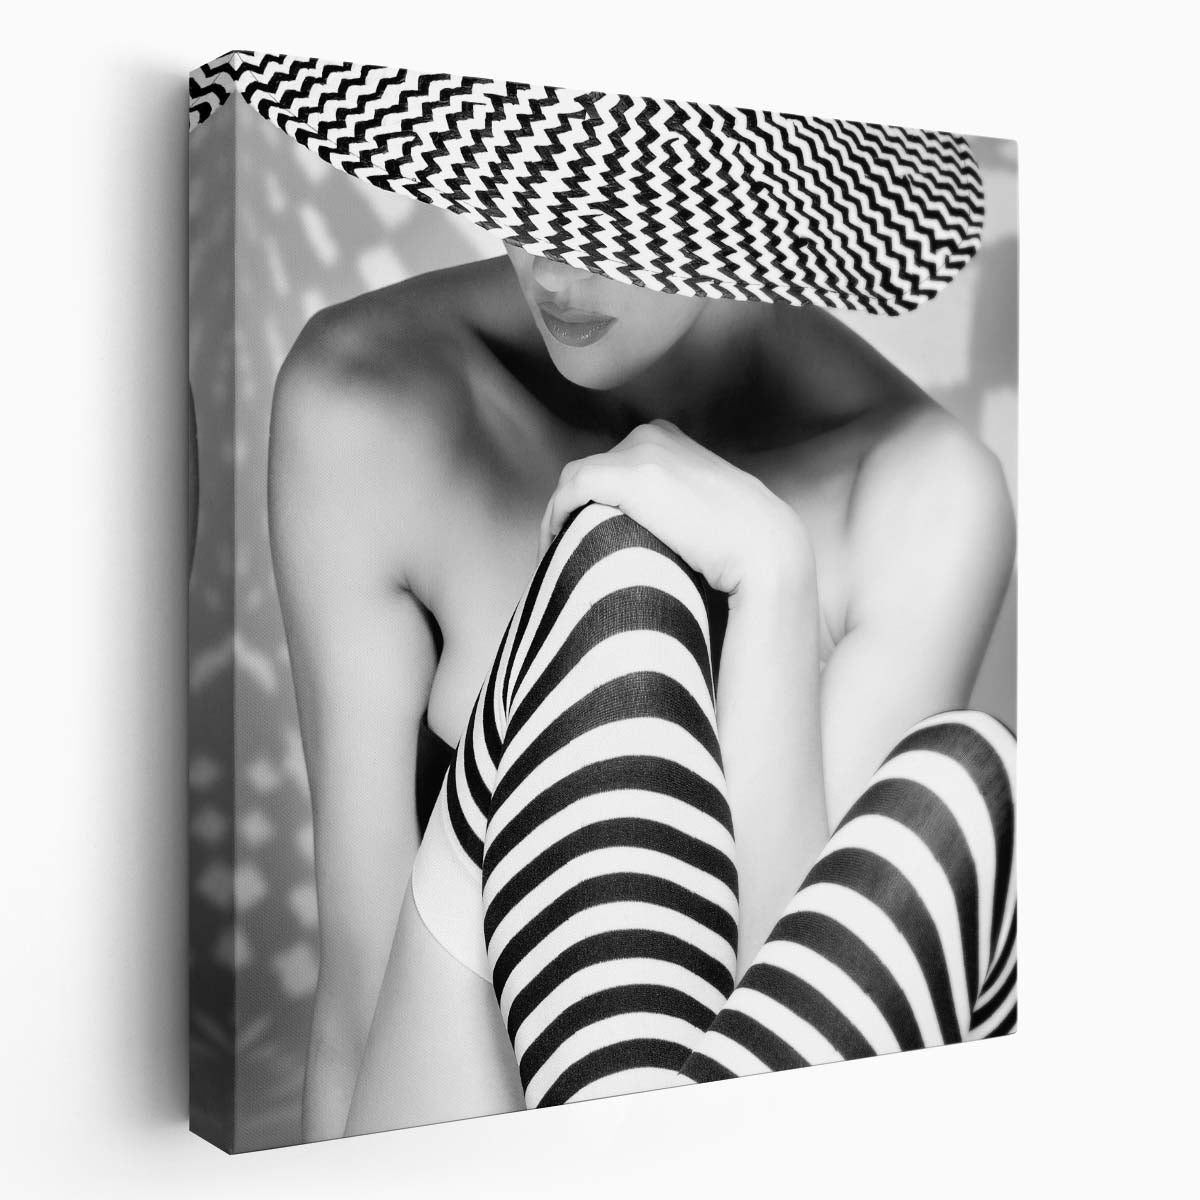 Zigzag Monochrome Fashionista Portrait Photographic Wall Art by Luxuriance Designs. Made in USA.